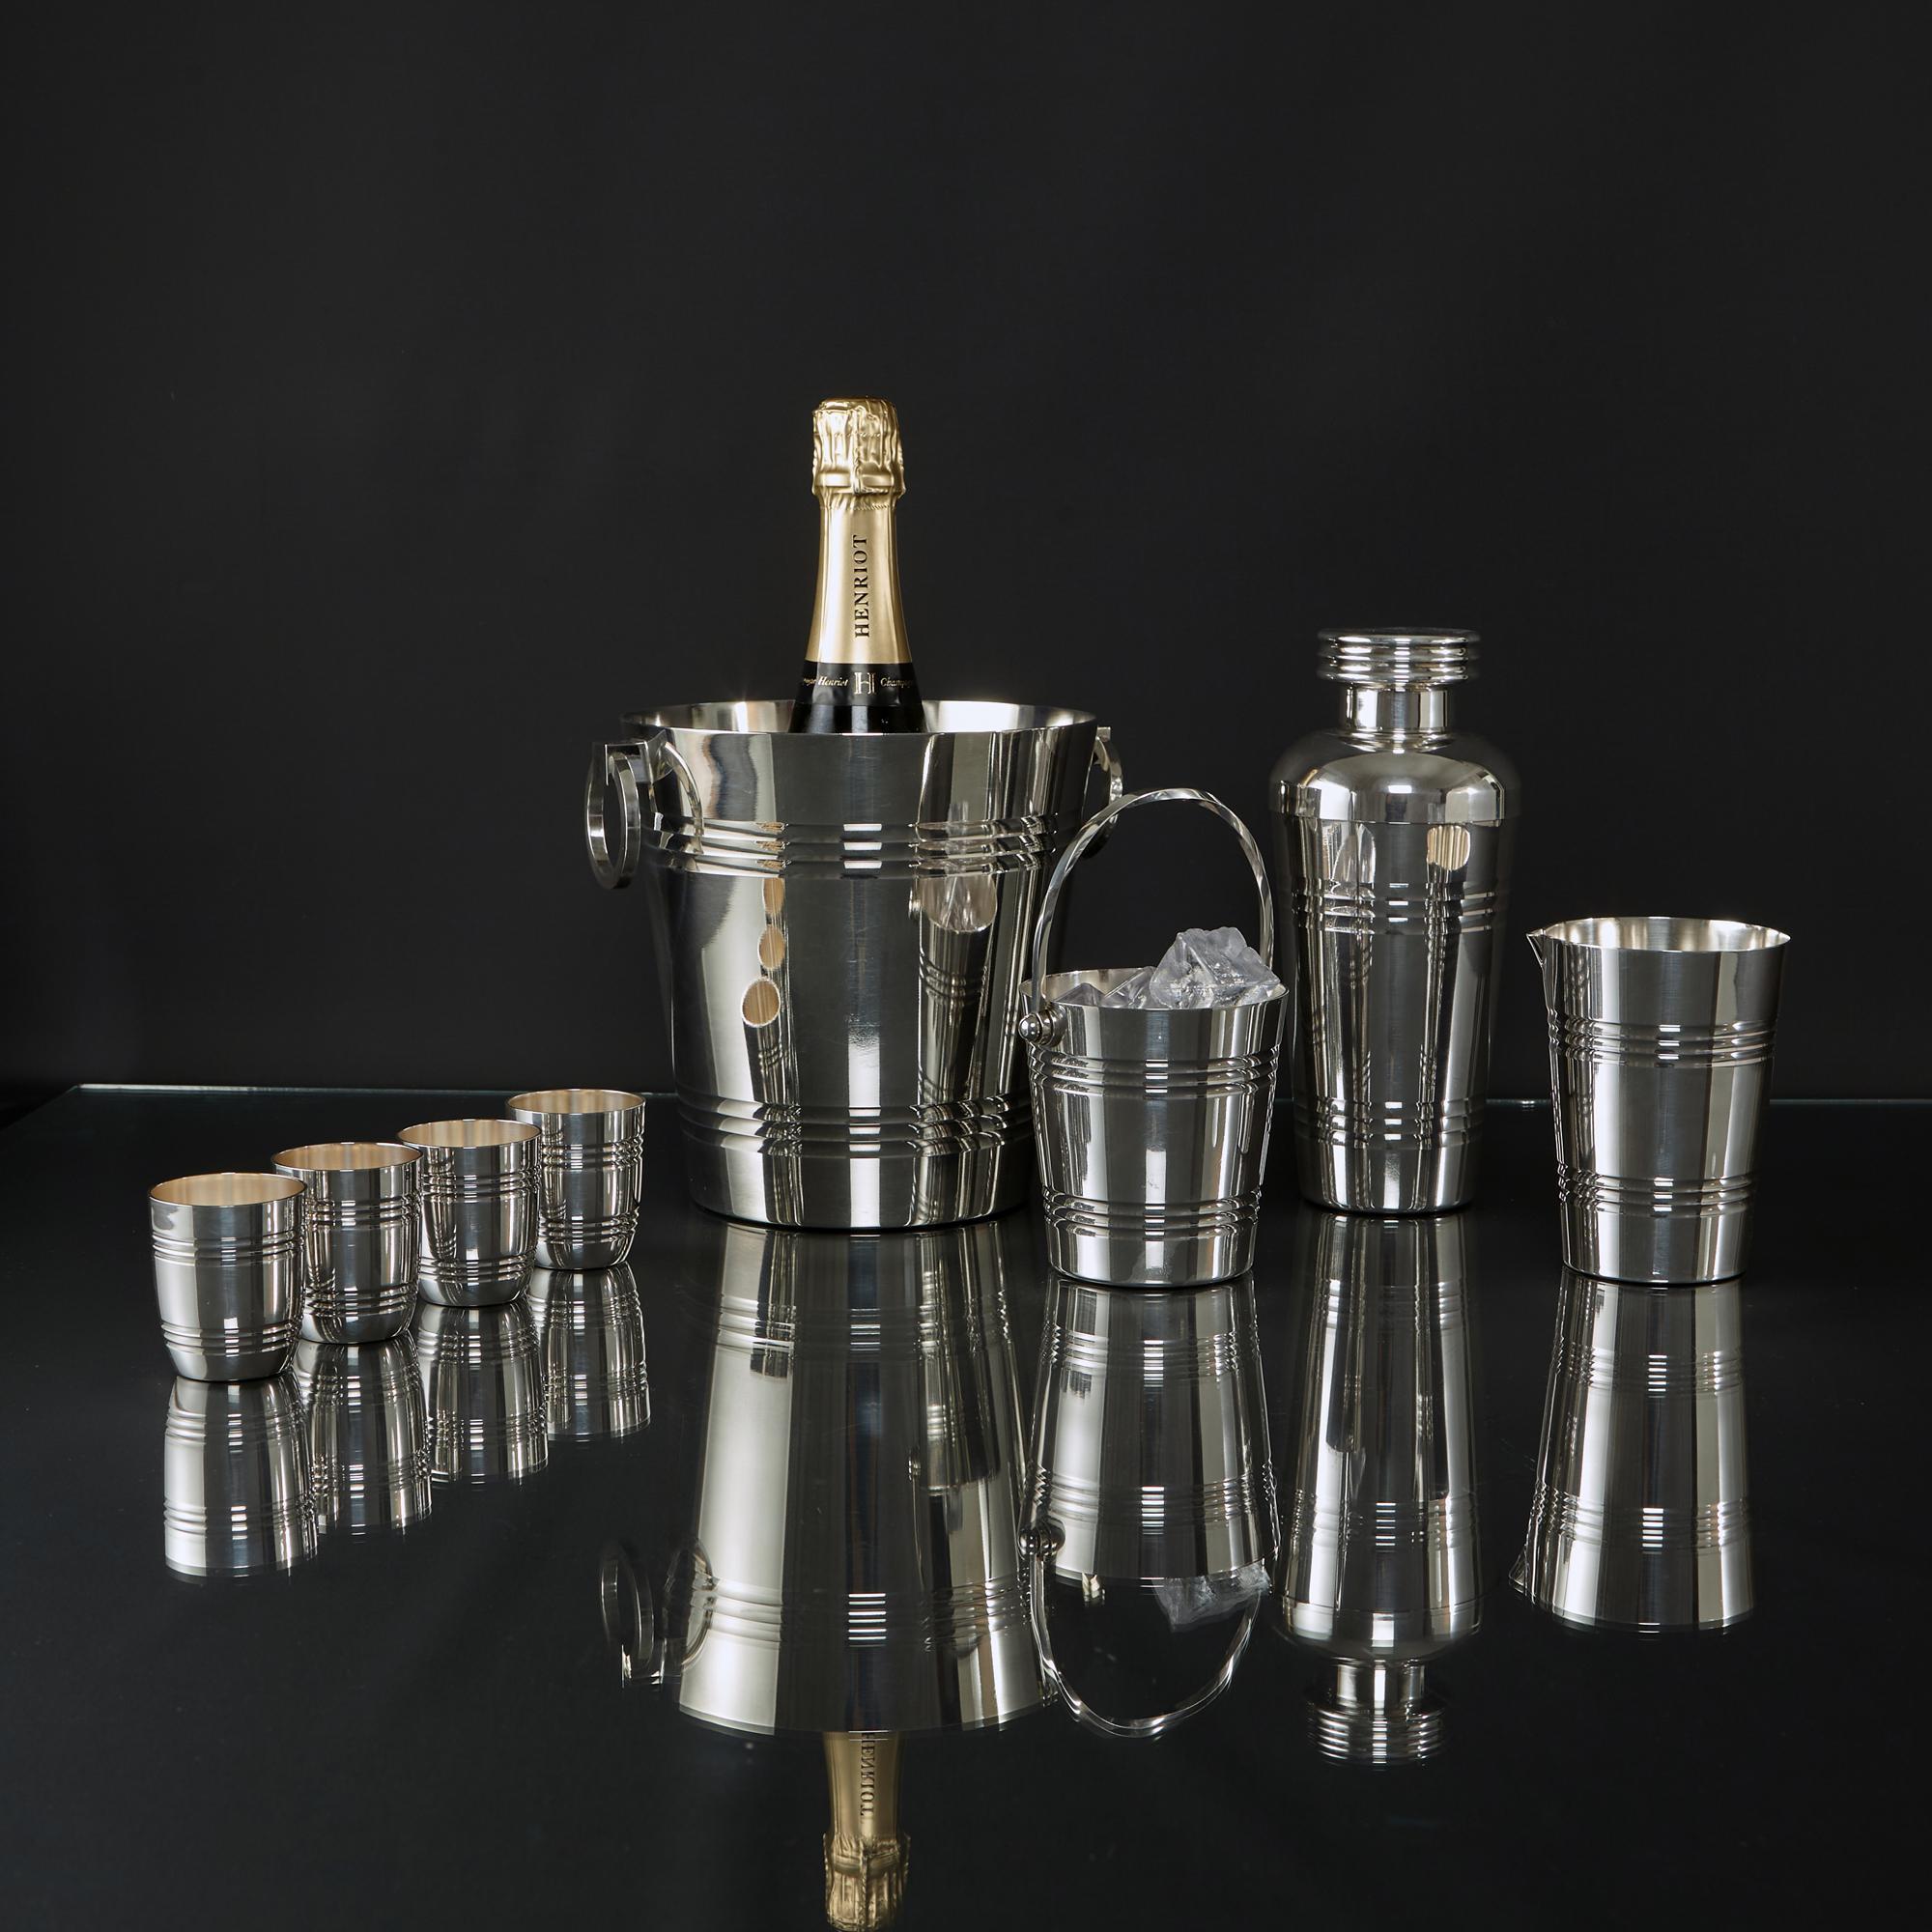 With distinct Art Deco design cues, this eight-piece French silver-plated cocktail or barware set comprises an ice bucket, cocktail shaker, ice pail, mixing jug and four beakers. All pieces are decorated with a simple banded pattern around the upper